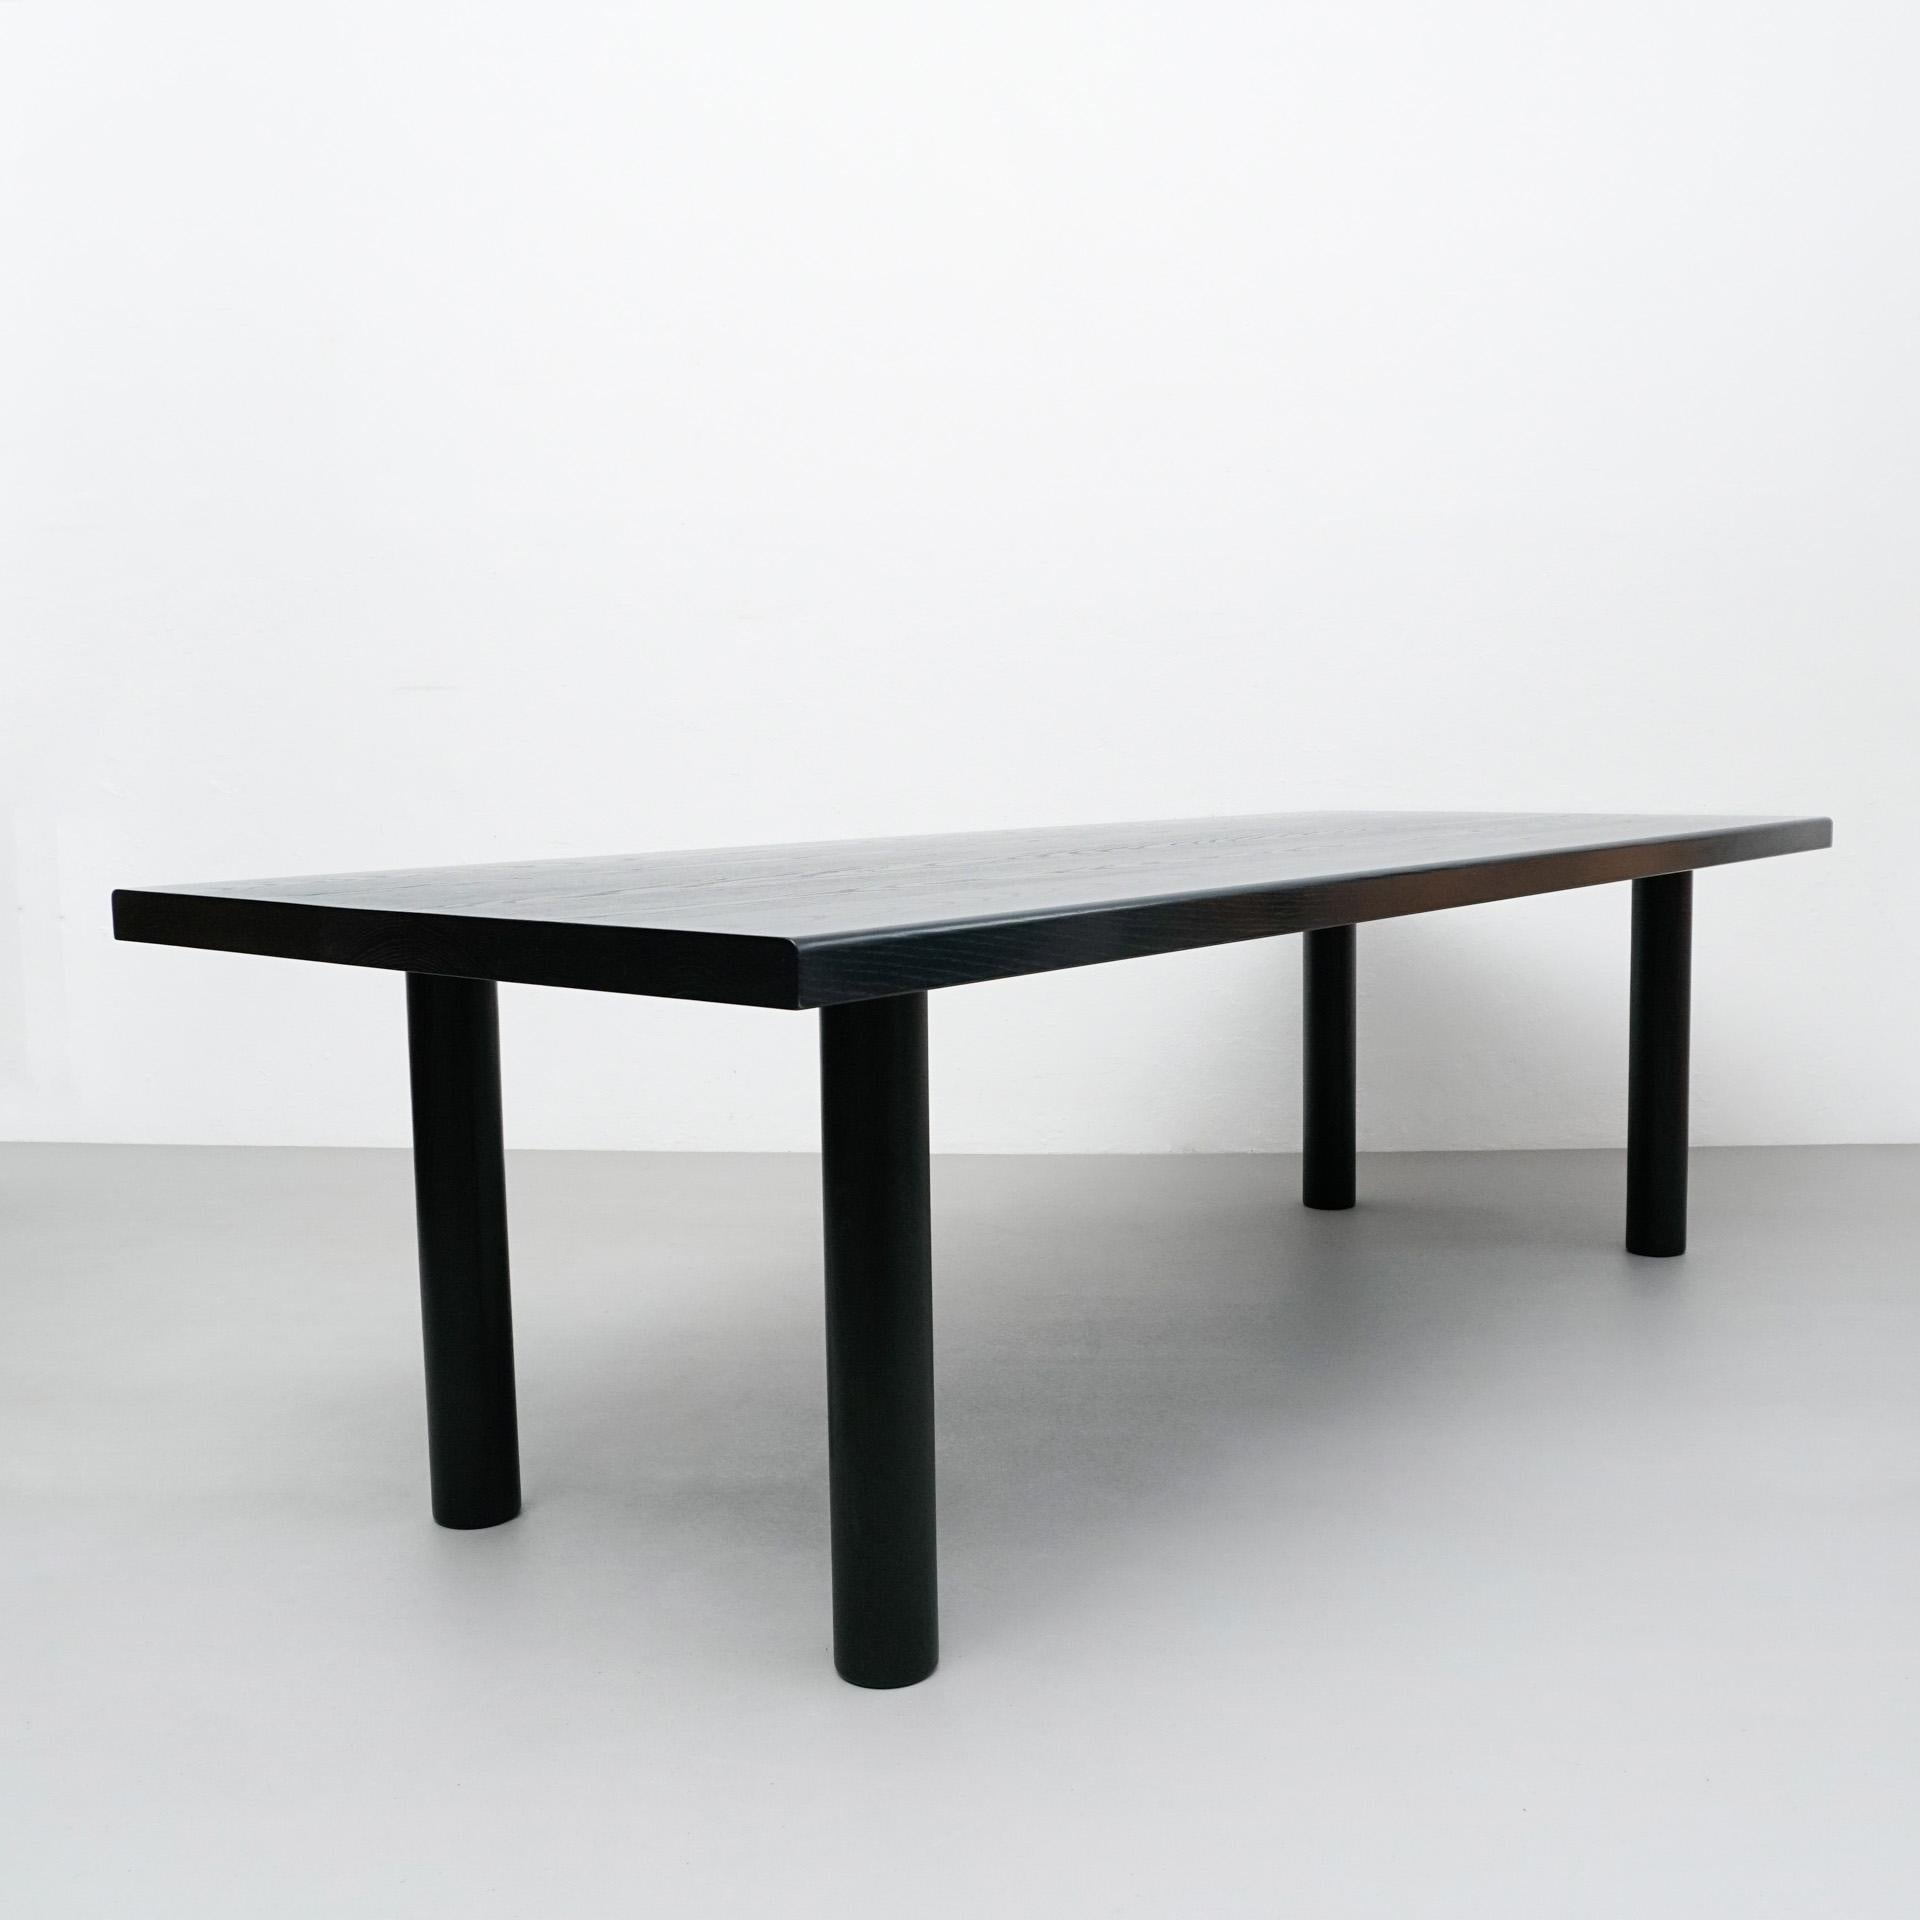 Large dining table by Dada est. manufactured in Barcelona, 2020.

Solid ash lacquered black.

Measures: 106 cm D x 260 cm W x 76 cm H 

Production delay: 8-10 weeks
There is the possibility of making it in different measures and